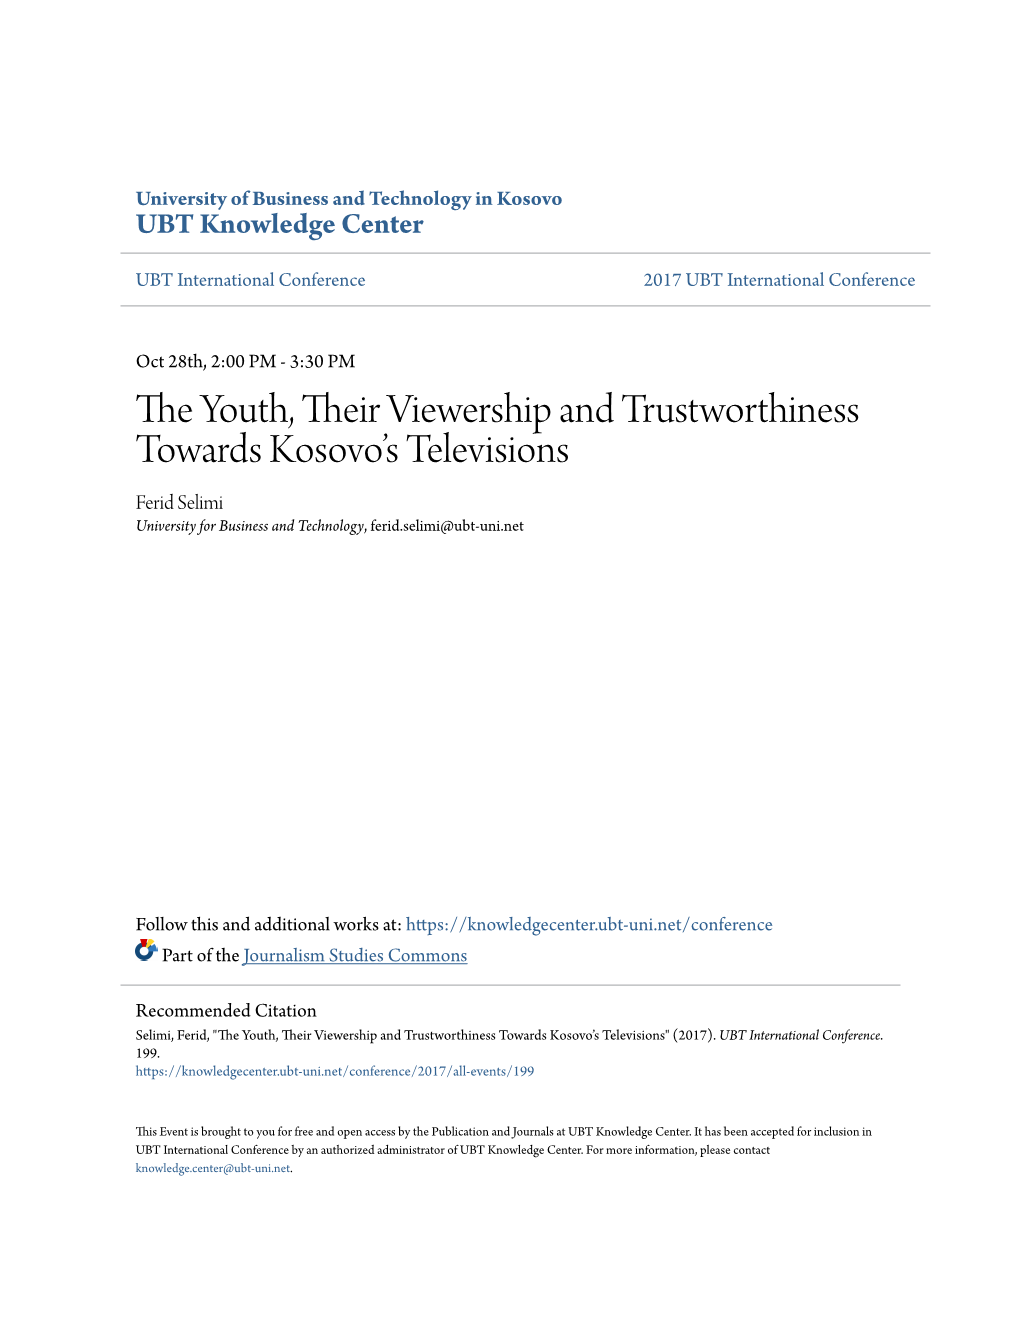 The Youth, Their Viewership and Trustworthiness Towards Kosovo's